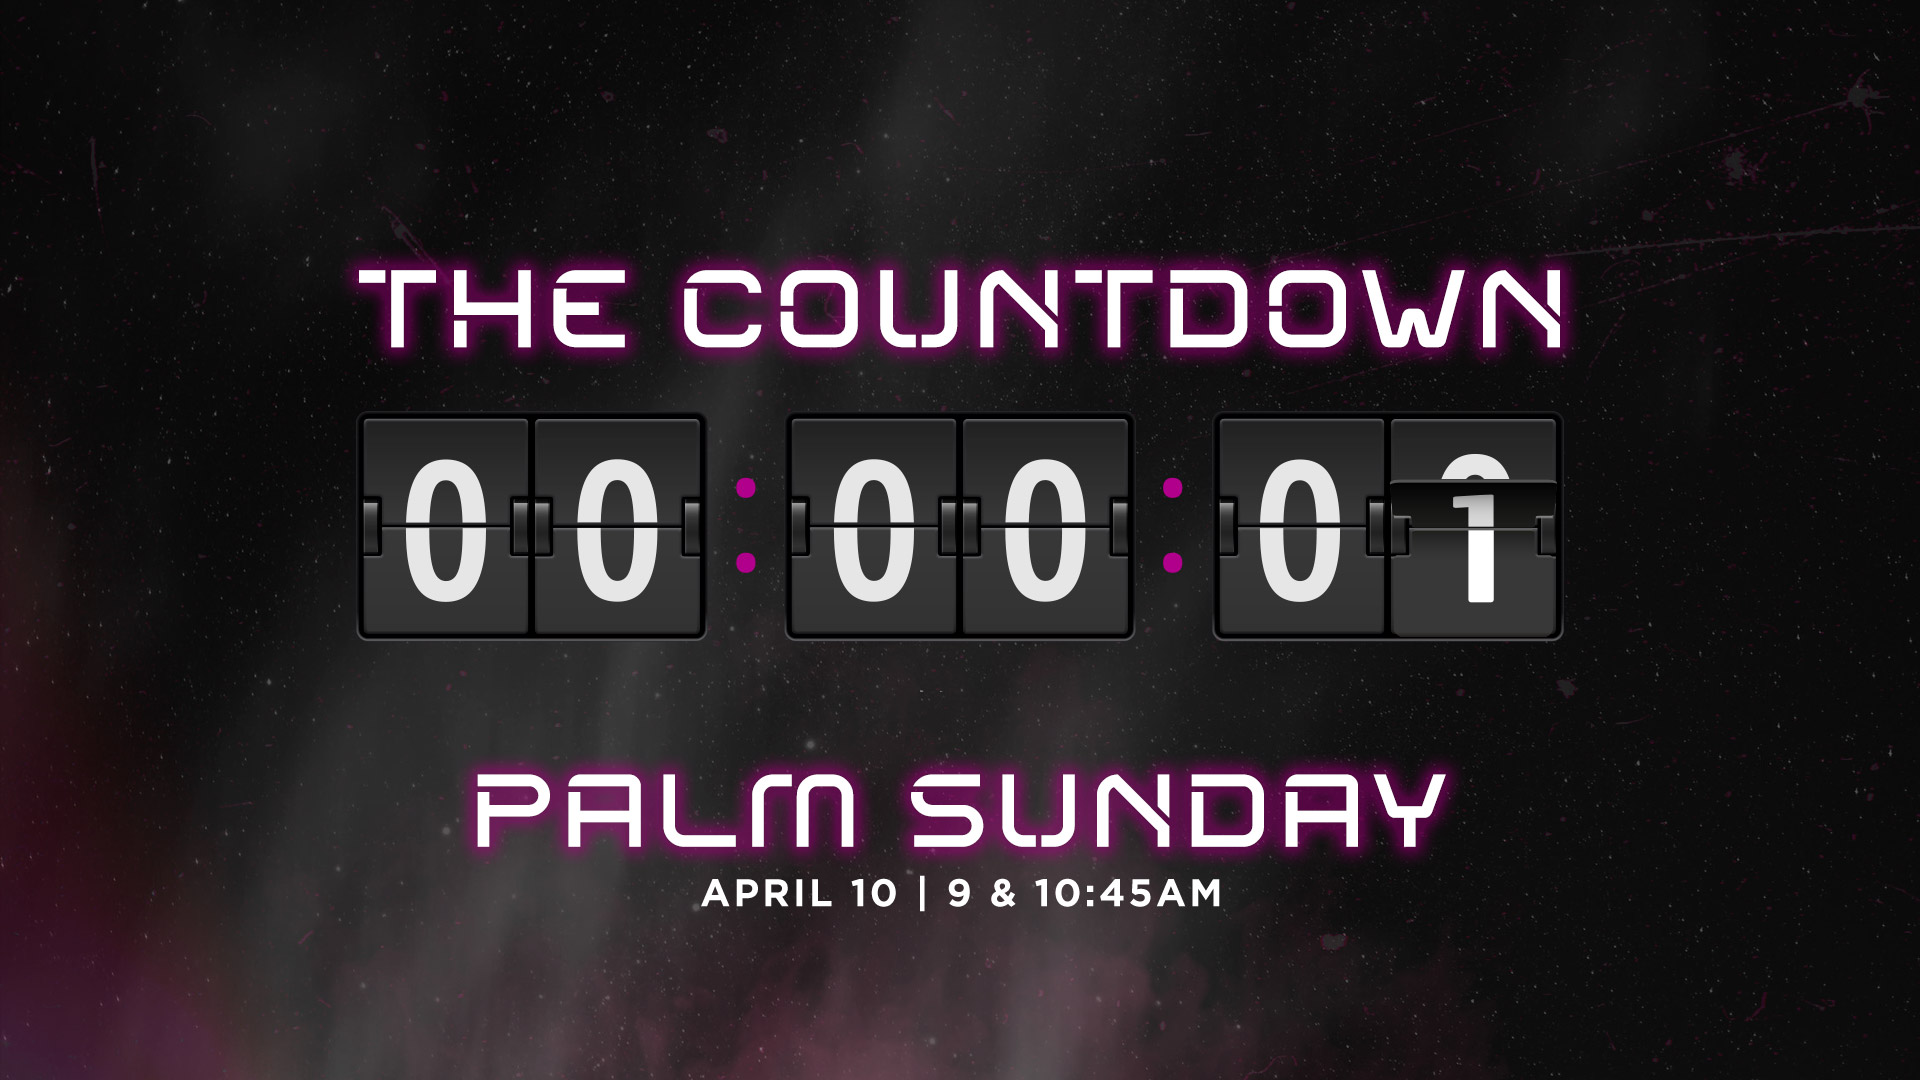    THE COUNTDOWN Palm Sunday